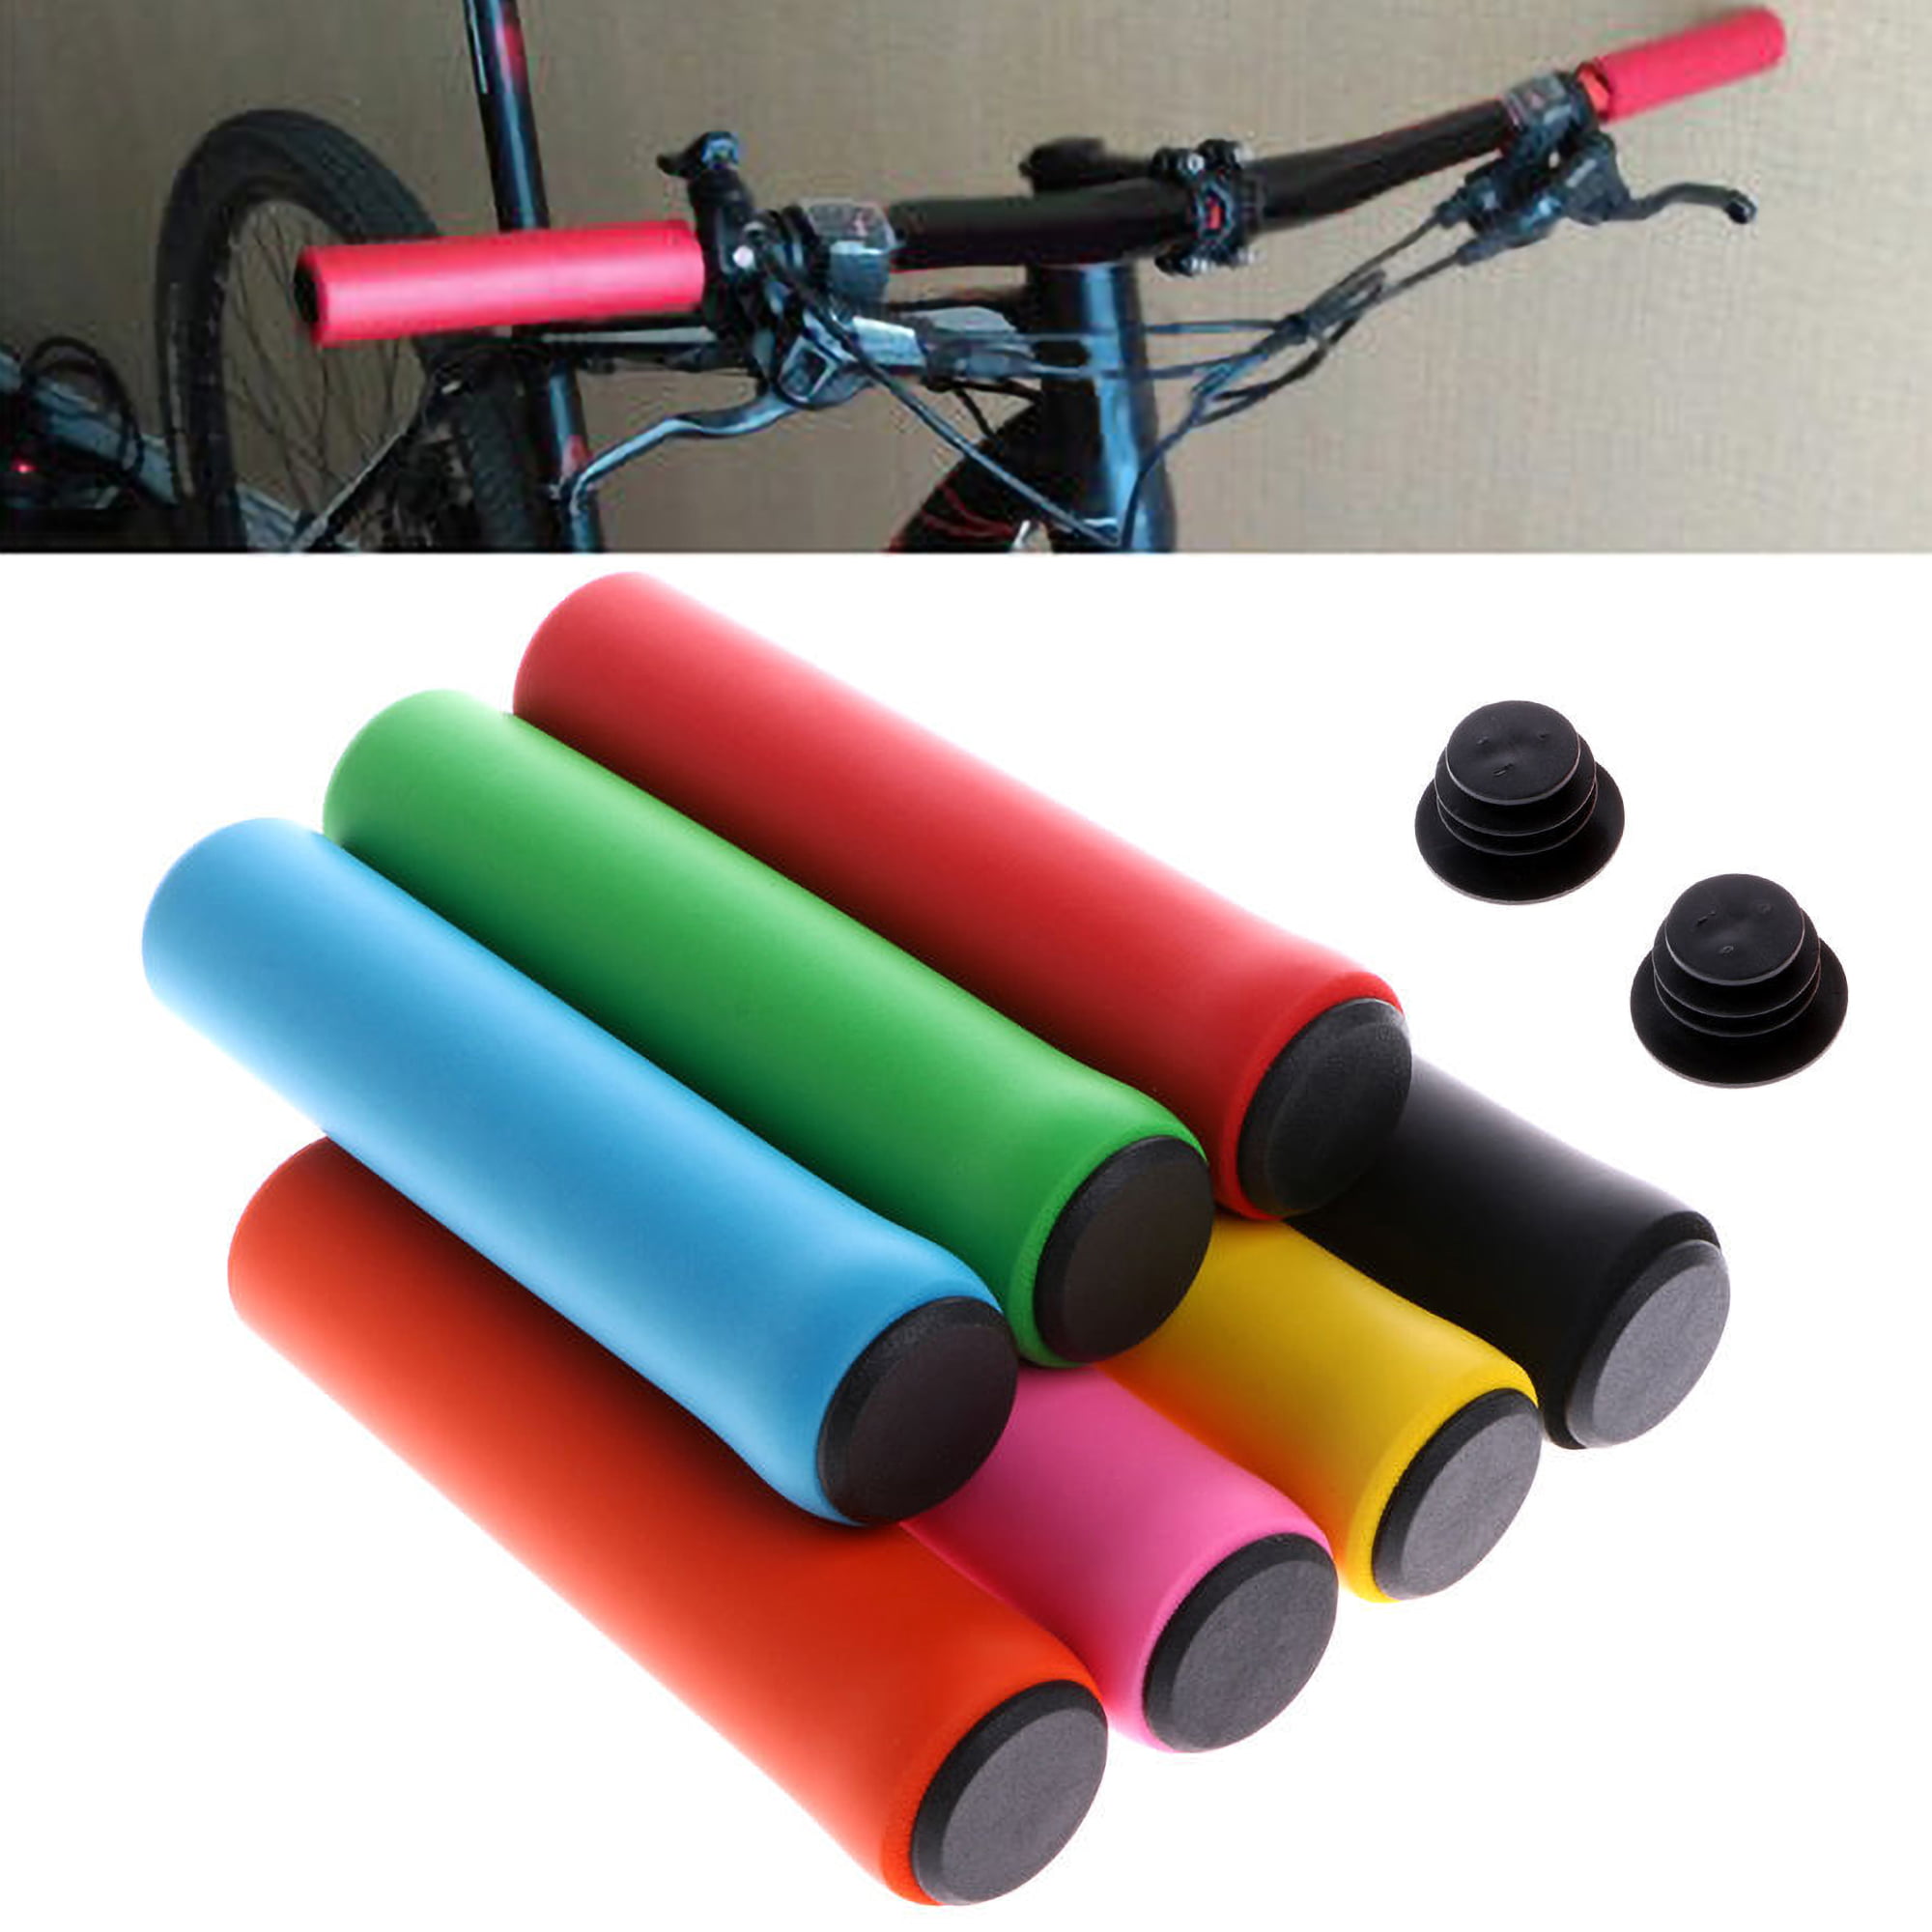 show original title Details about   Cycling Mountain Bike Bicycle MTB Handlebar Rubber Grips Non-Slip Handle C8R5 